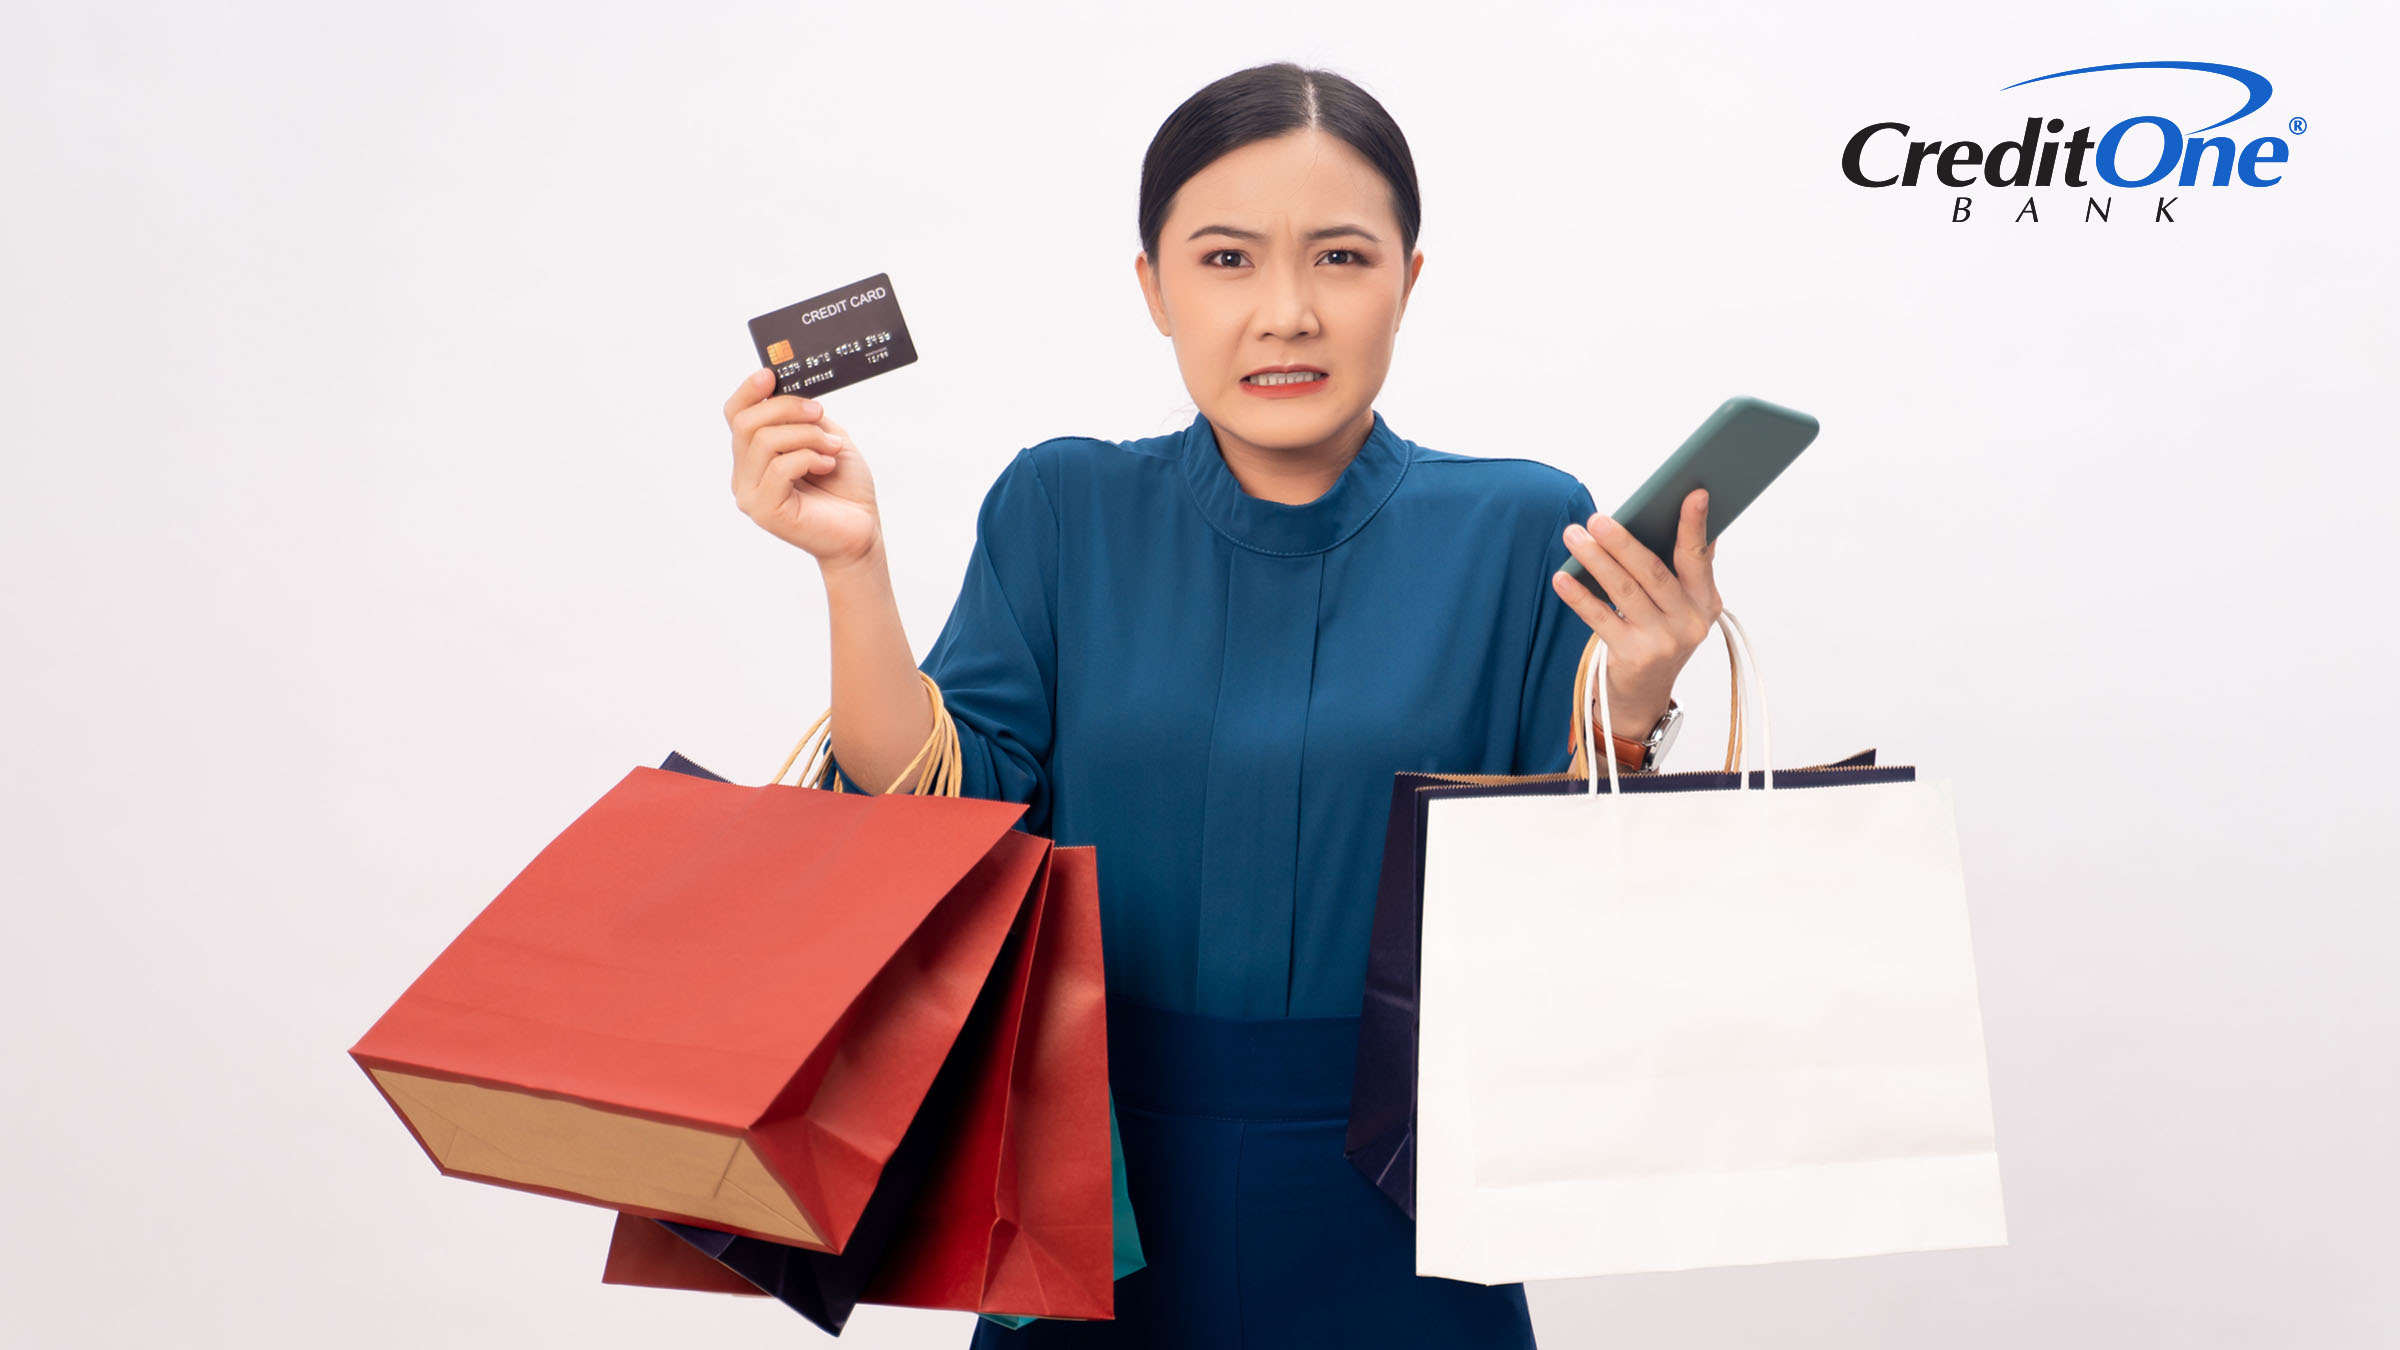 A woman holding shopping bags, a credit card, and a cell phone looks worried about whether she made a good or bad purchase on her card.